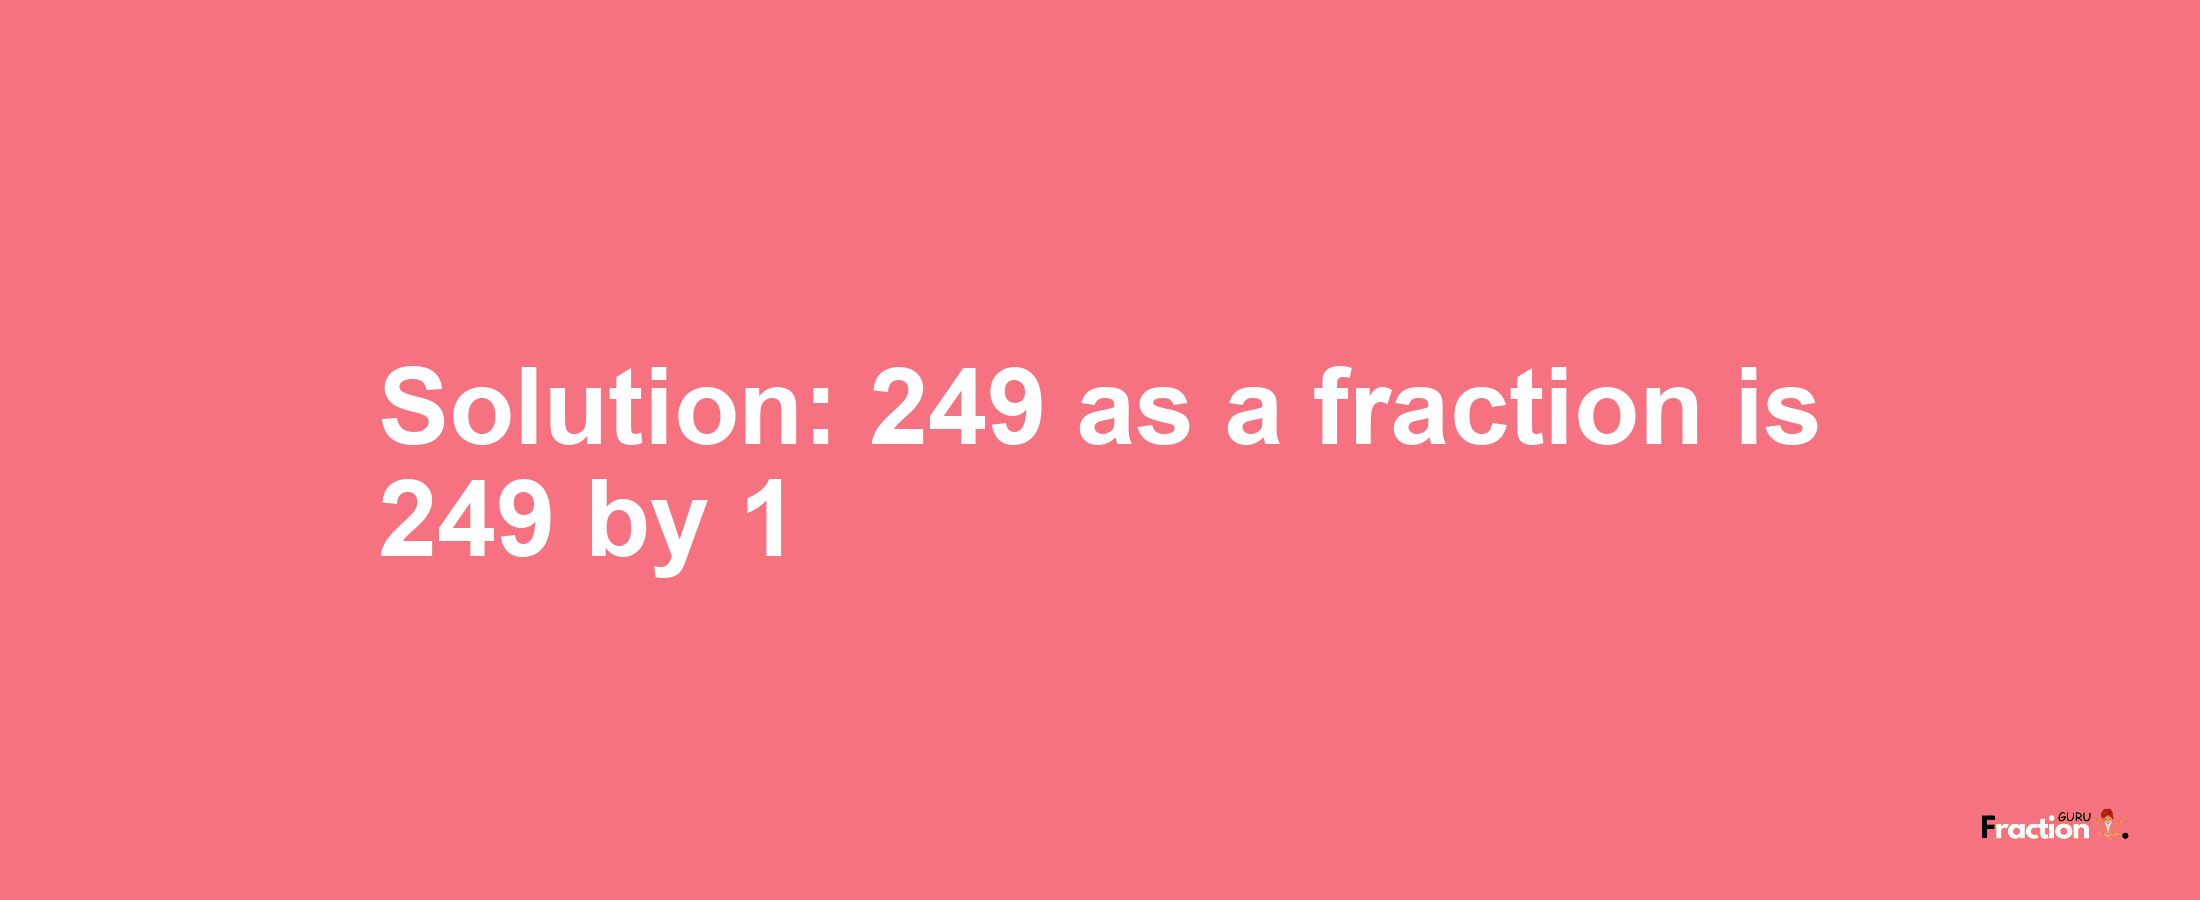 Solution:249 as a fraction is 249/1